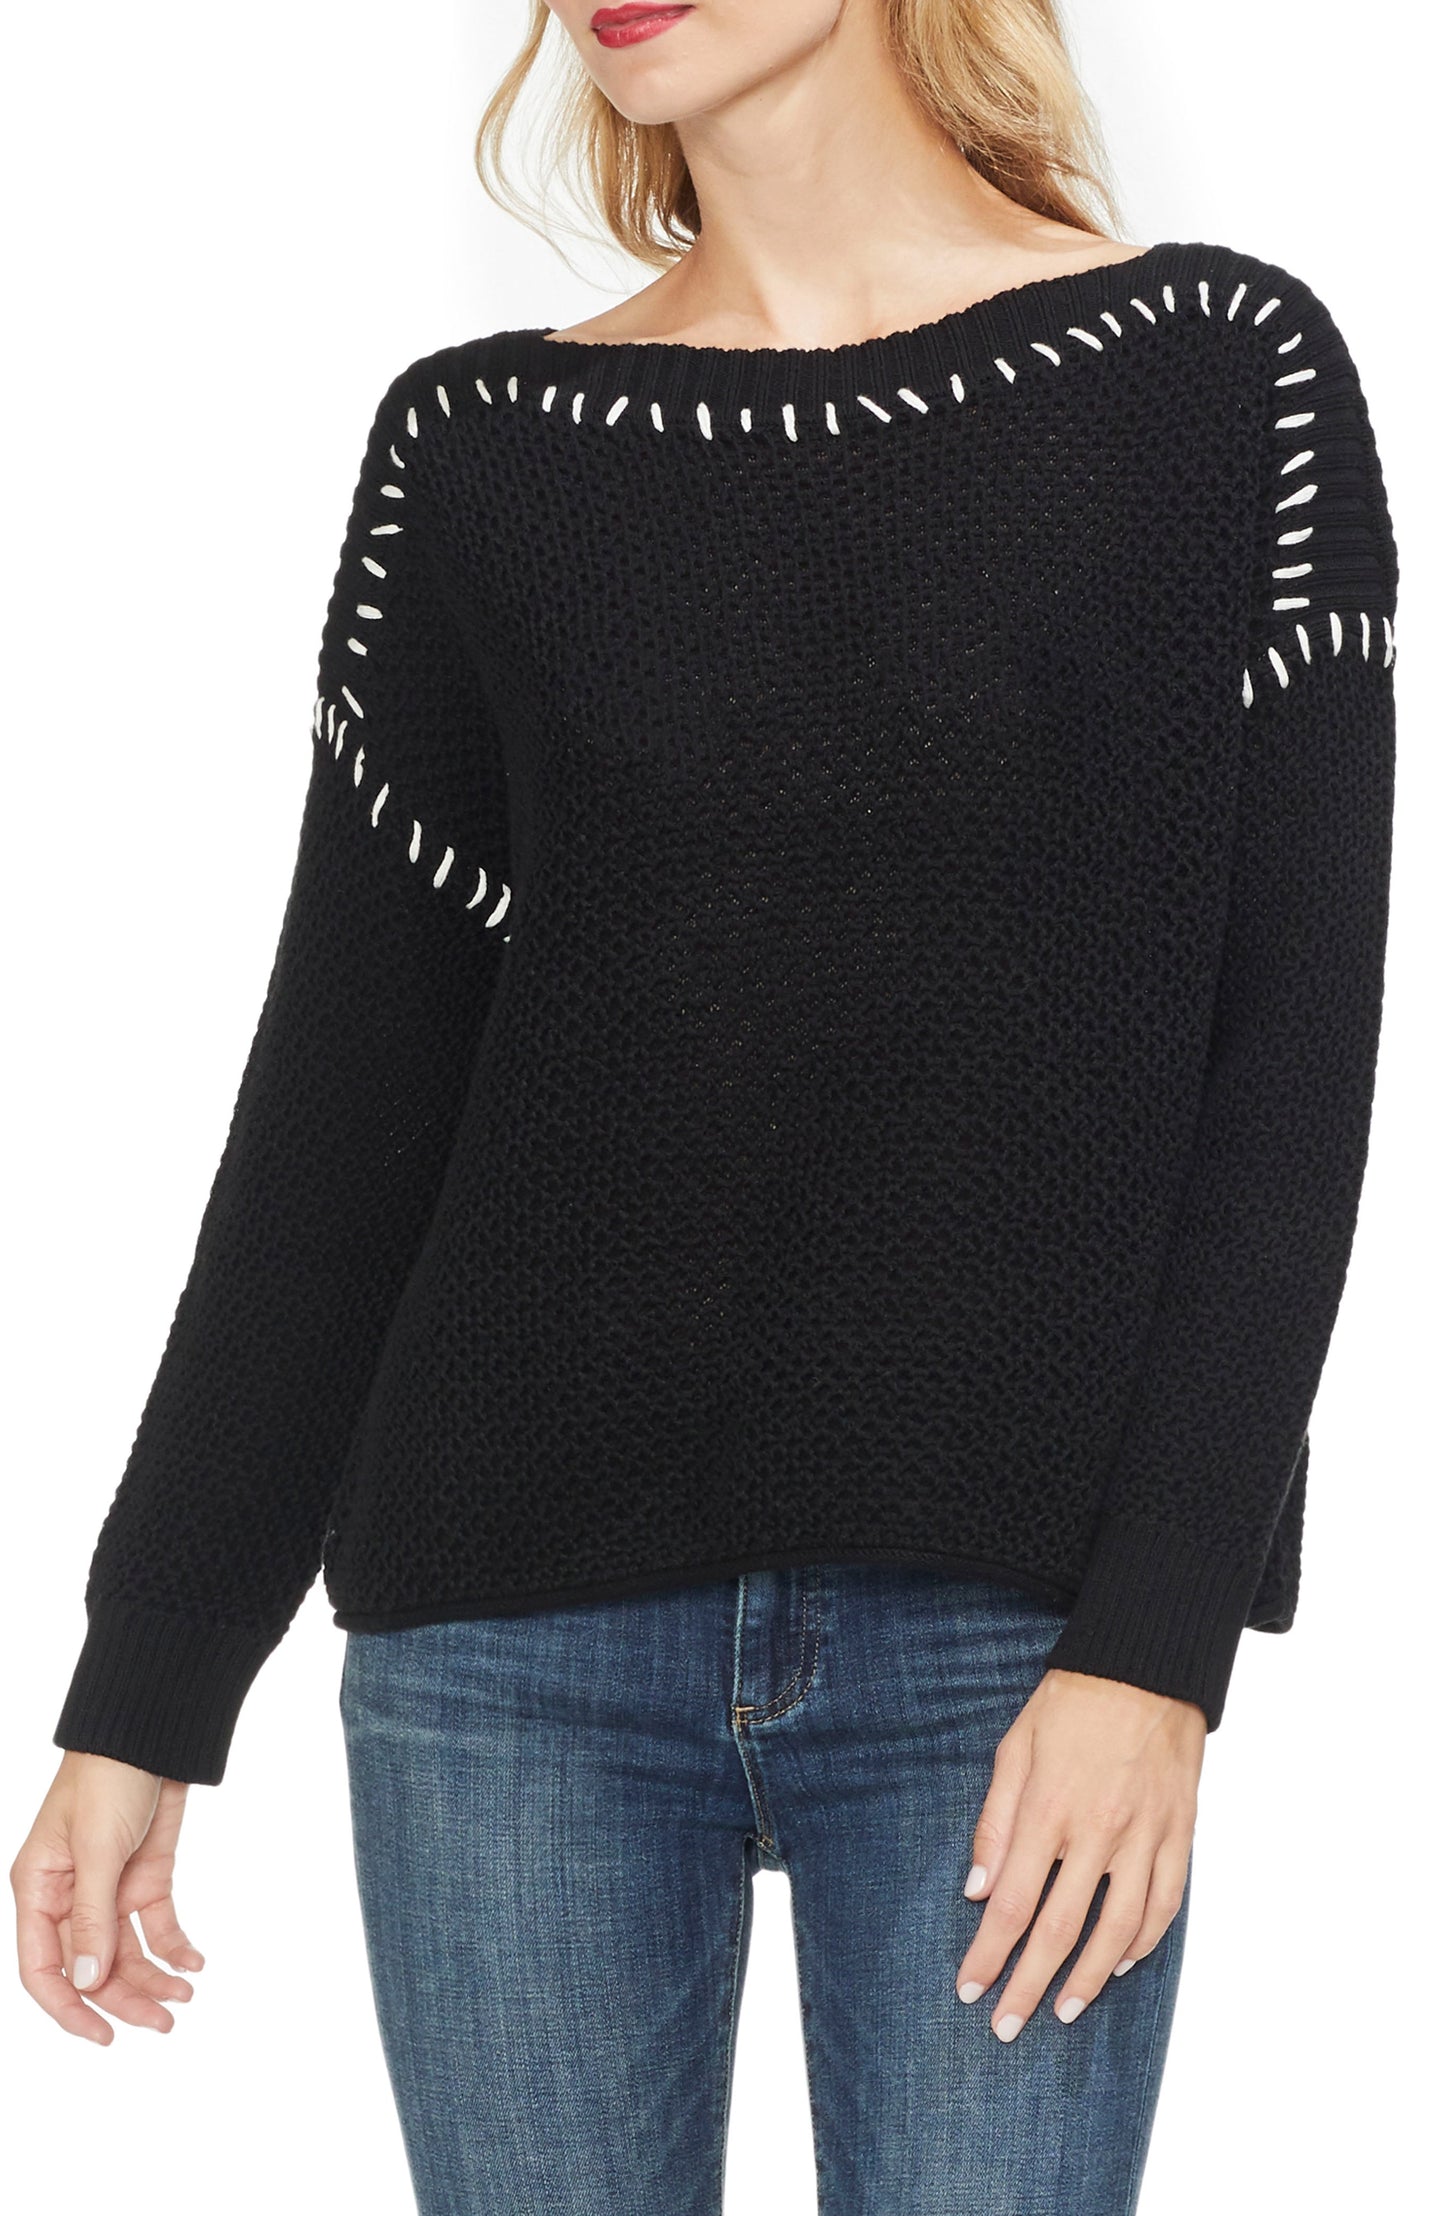 Vince Camuto Cotton Boat-Neck Sweater